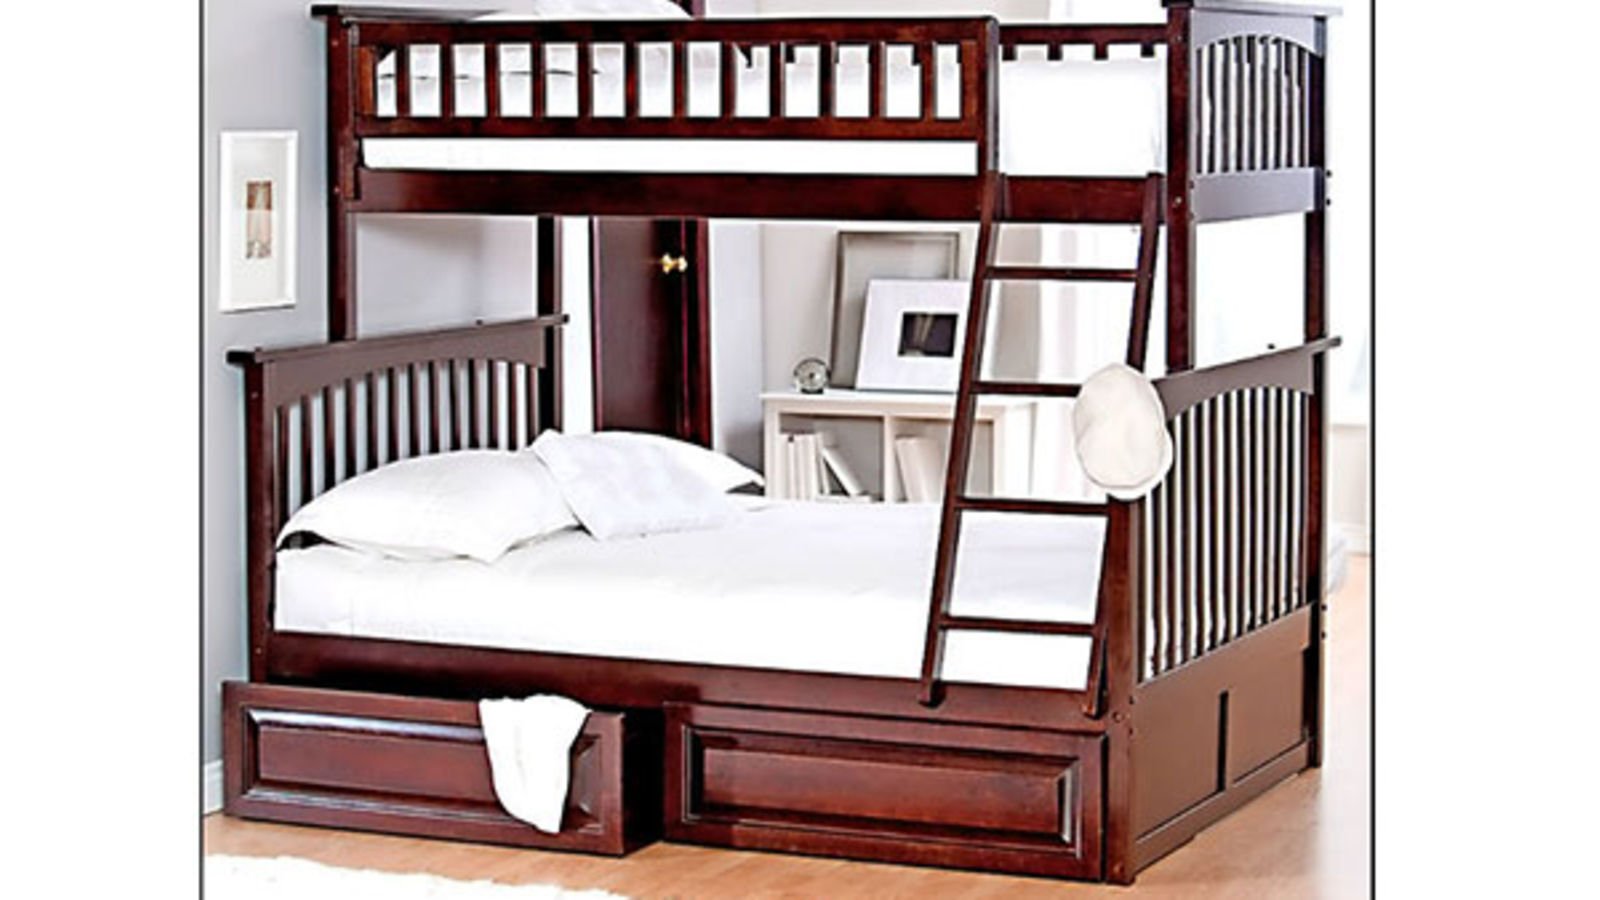 Save Your Space With Multi Functional Bed Designs Nation